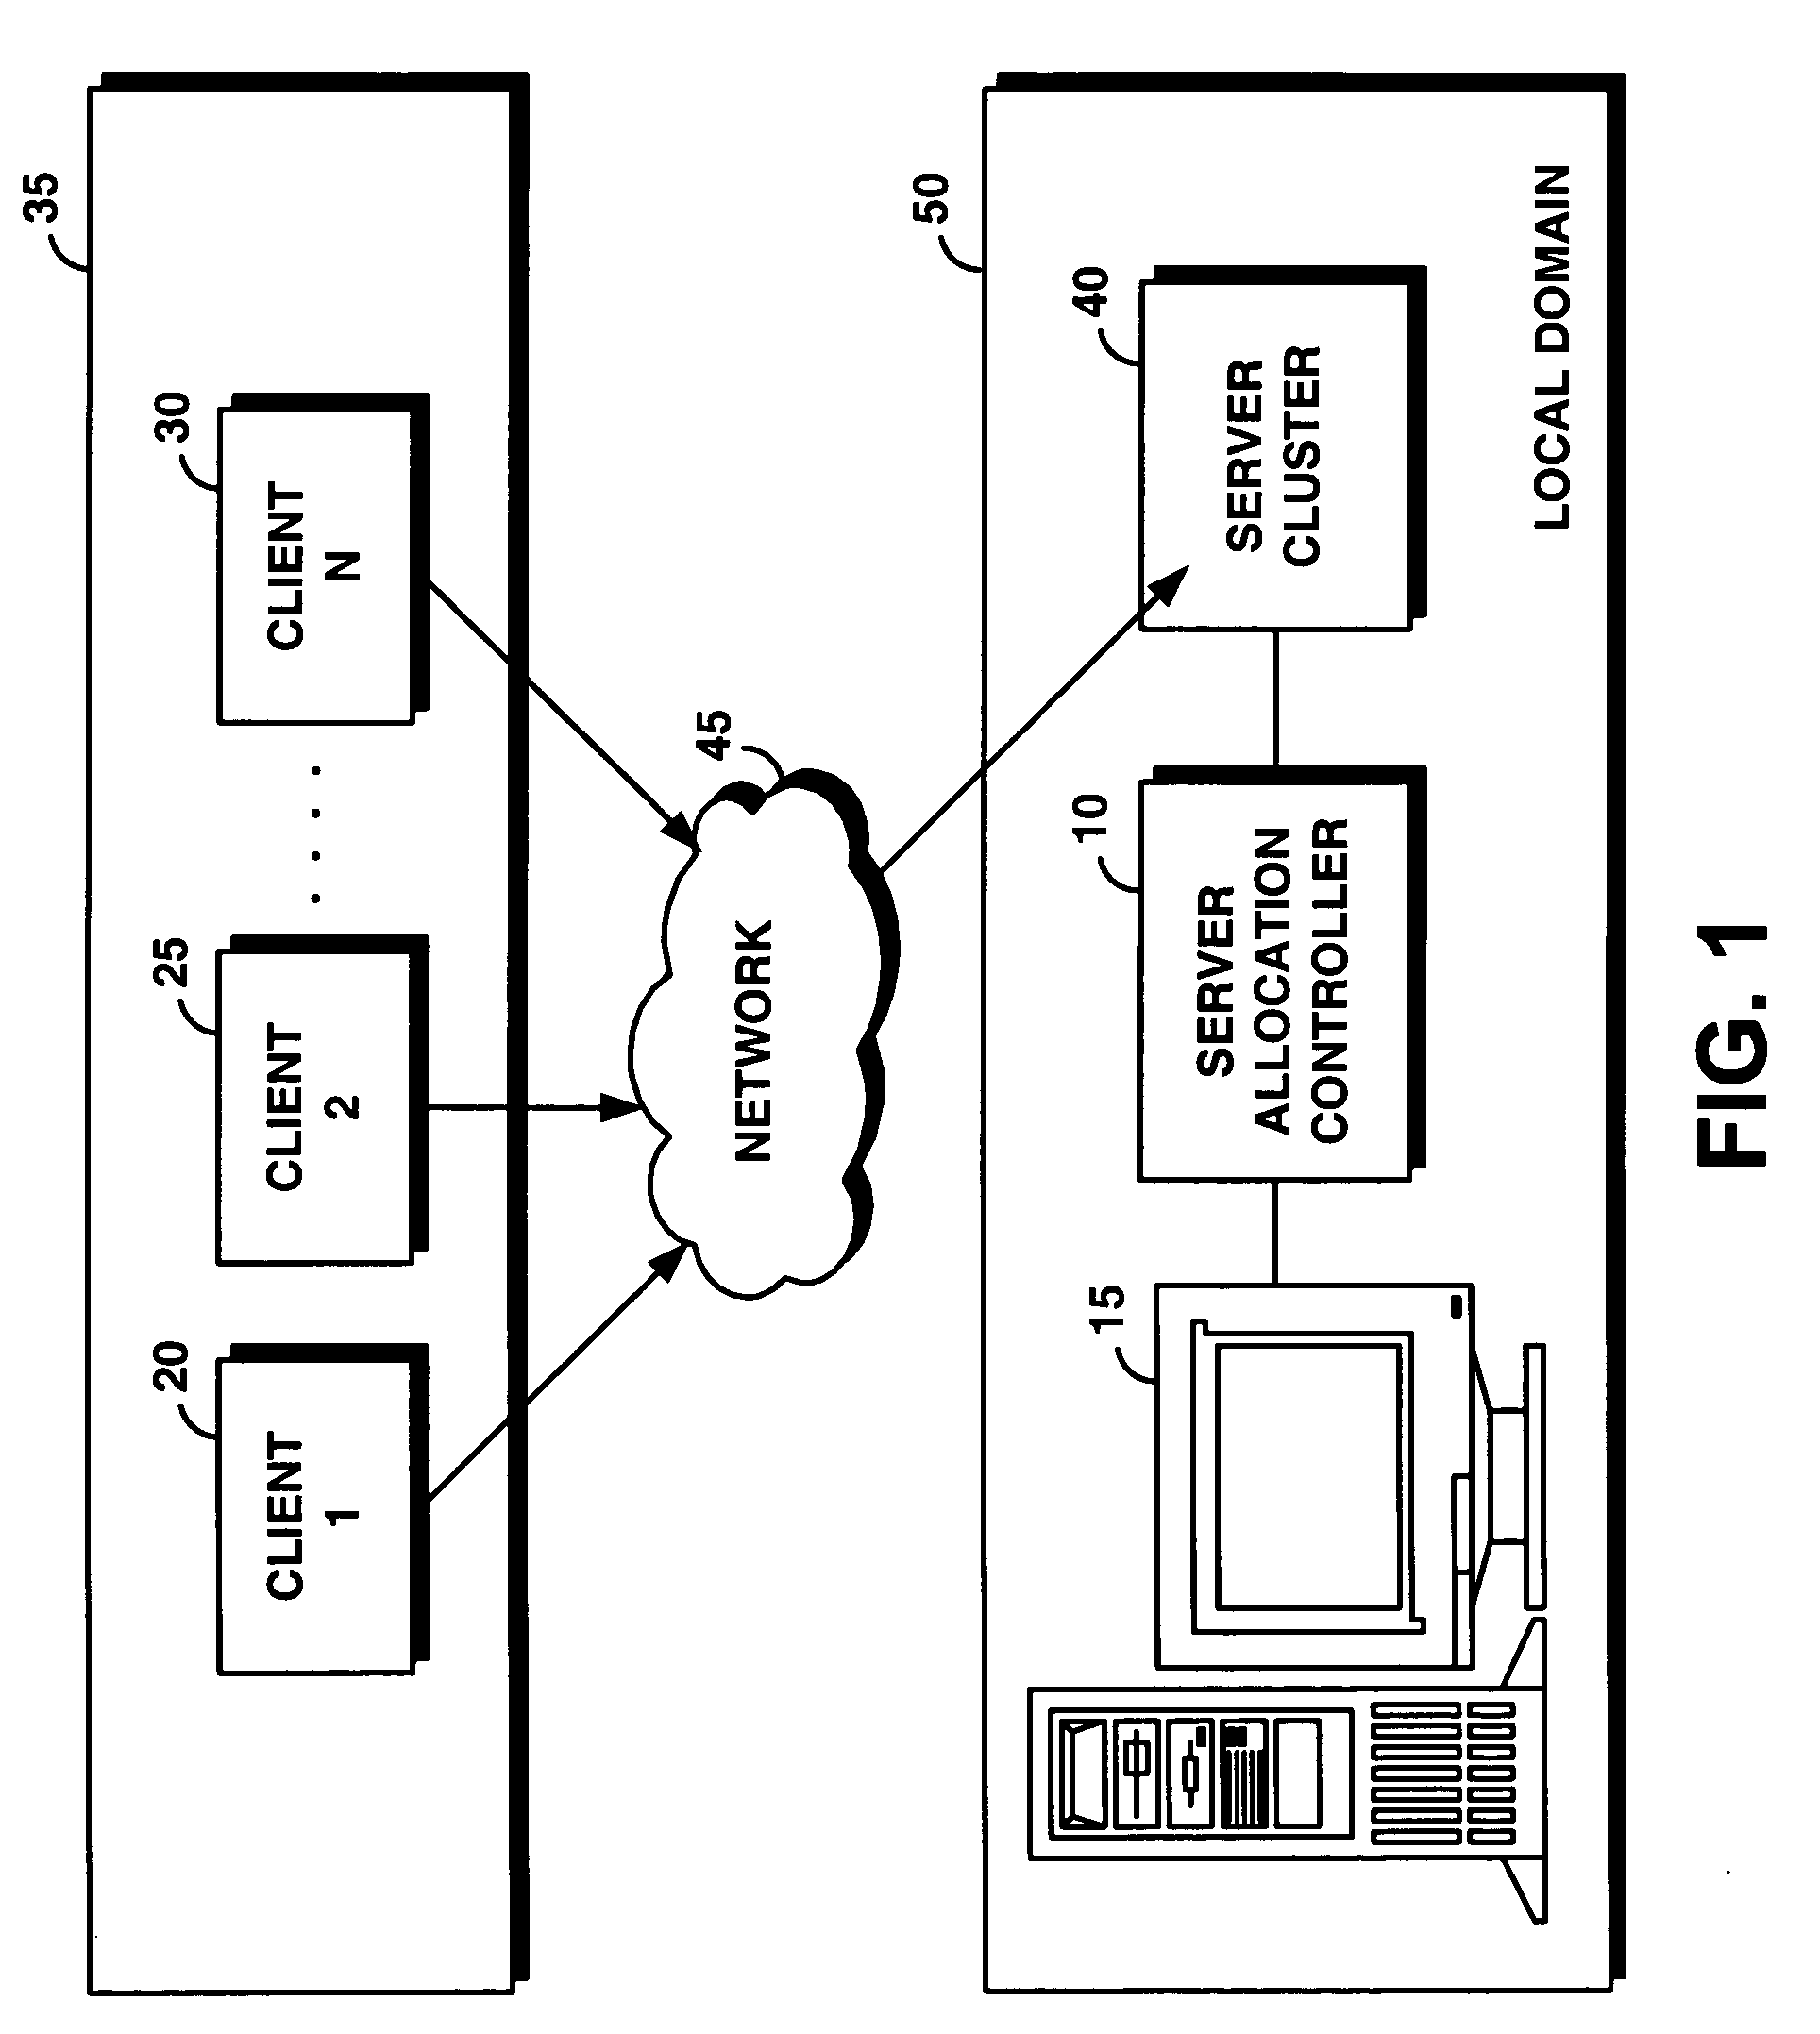 System and method for supporting transaction and parallel services across multiple domains based on service level agreenments